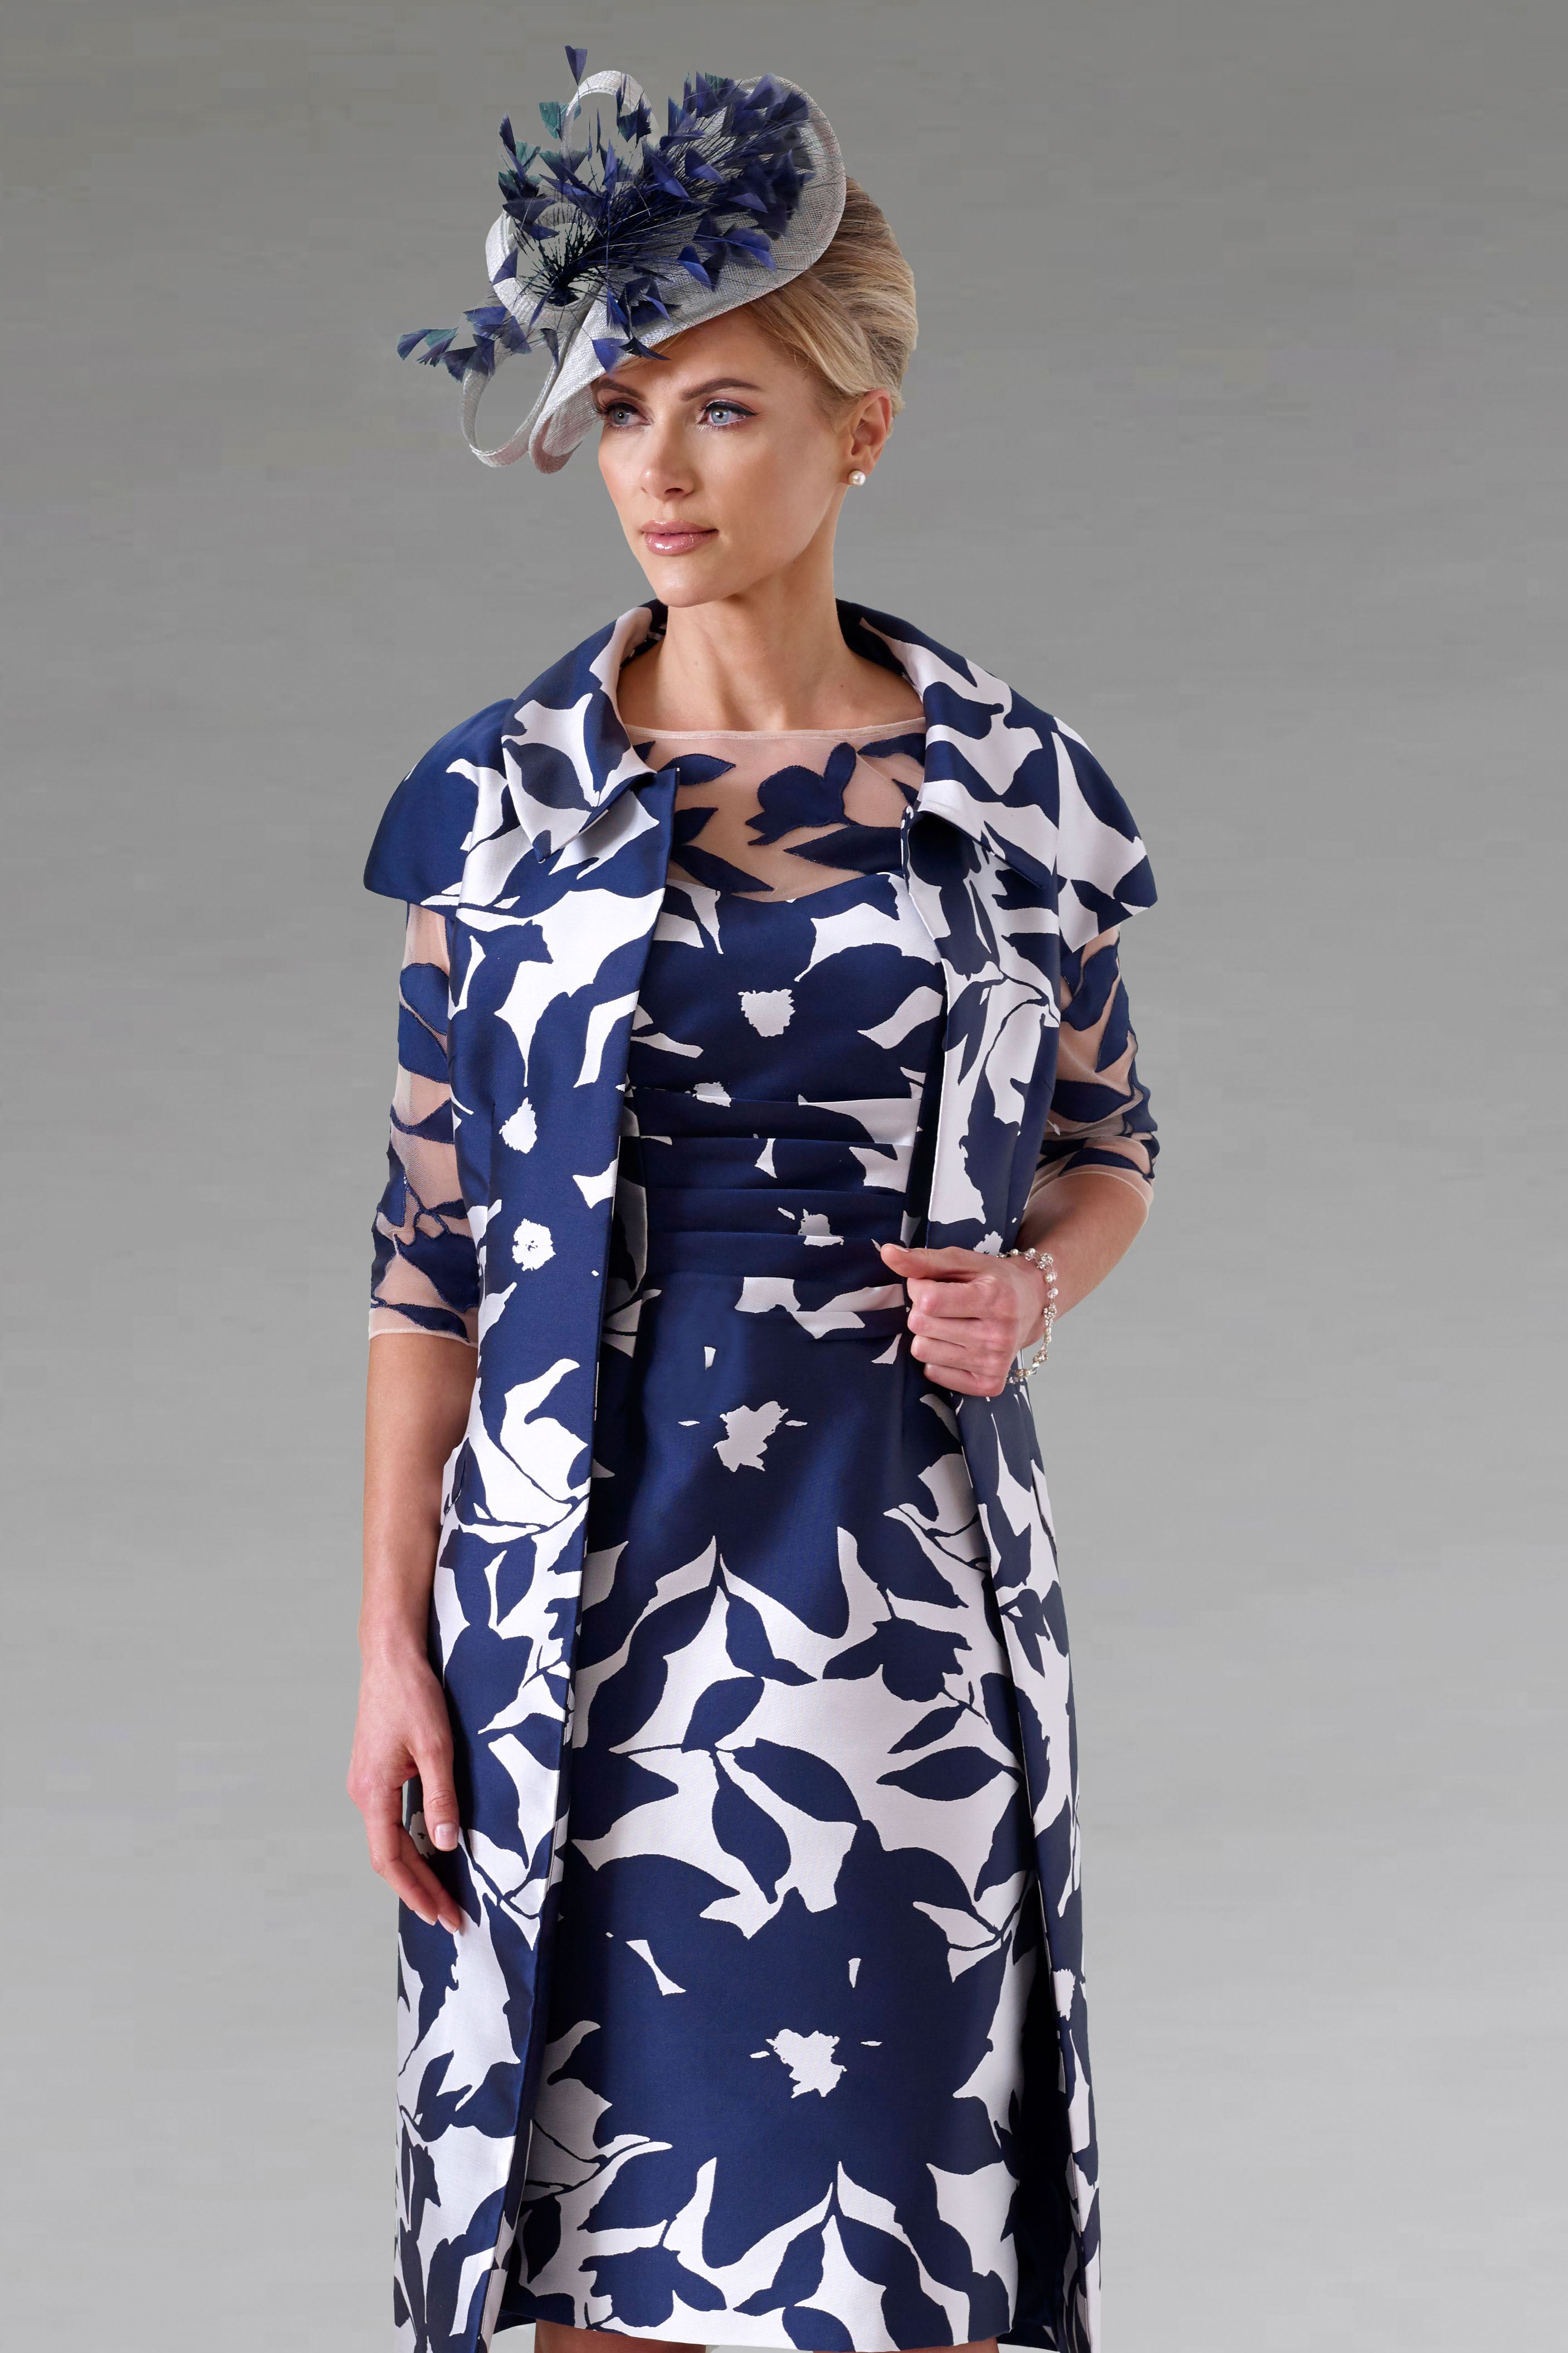 Short fitted dress with matching coat. IR4916S set - Catherines of Partick